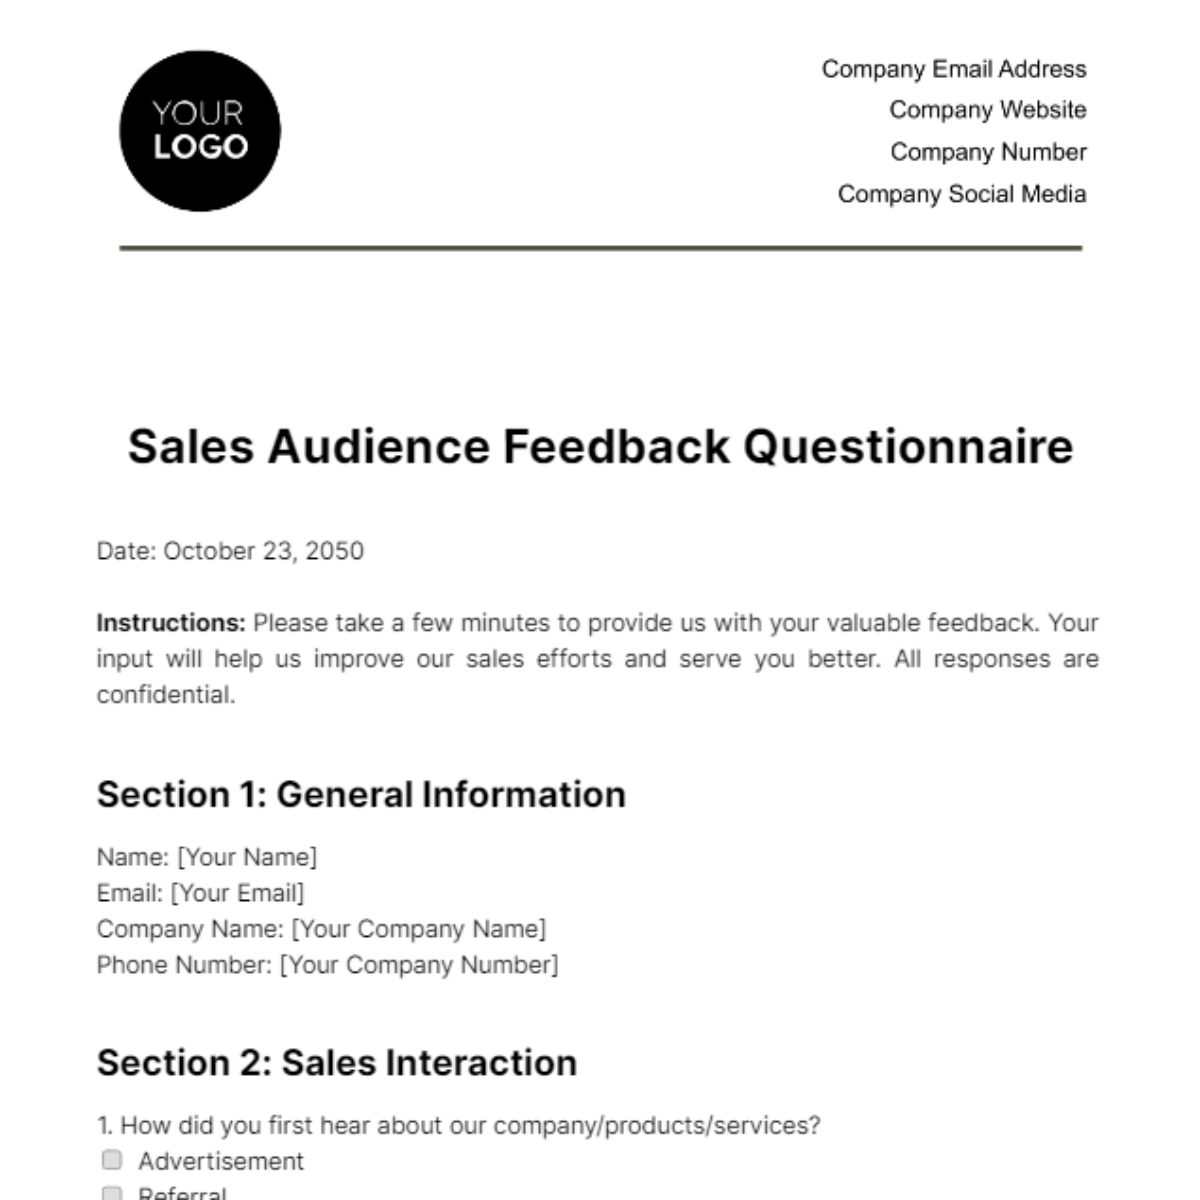 Sales Audience Feedback Questionnaire Template